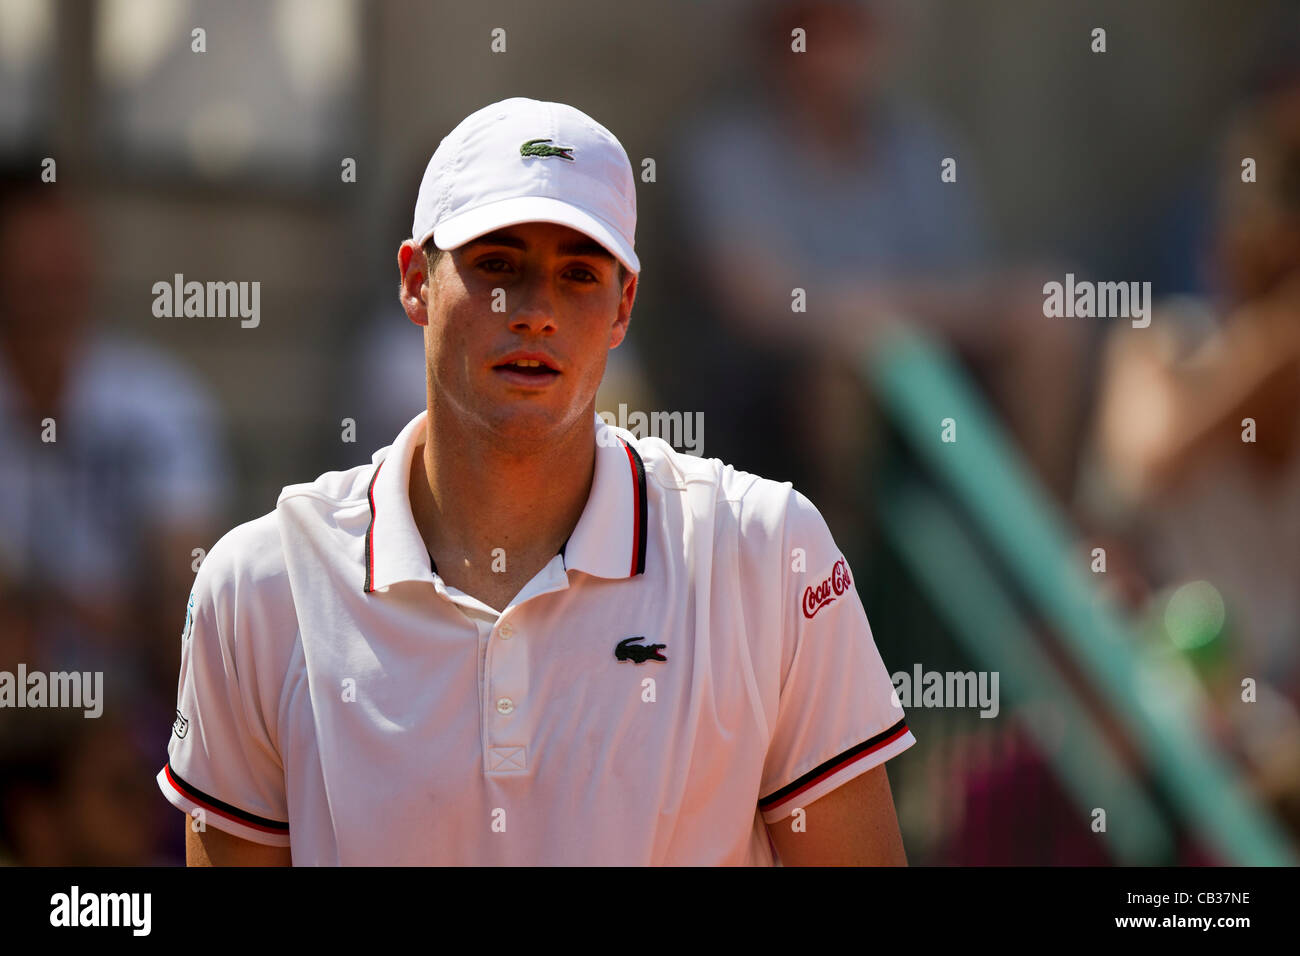 28.05.2012 Paris, France. John Isner in action against Rogerio Dutra Silva on day 2 of the French Open Tennis from Roland Garros. Stock Photo